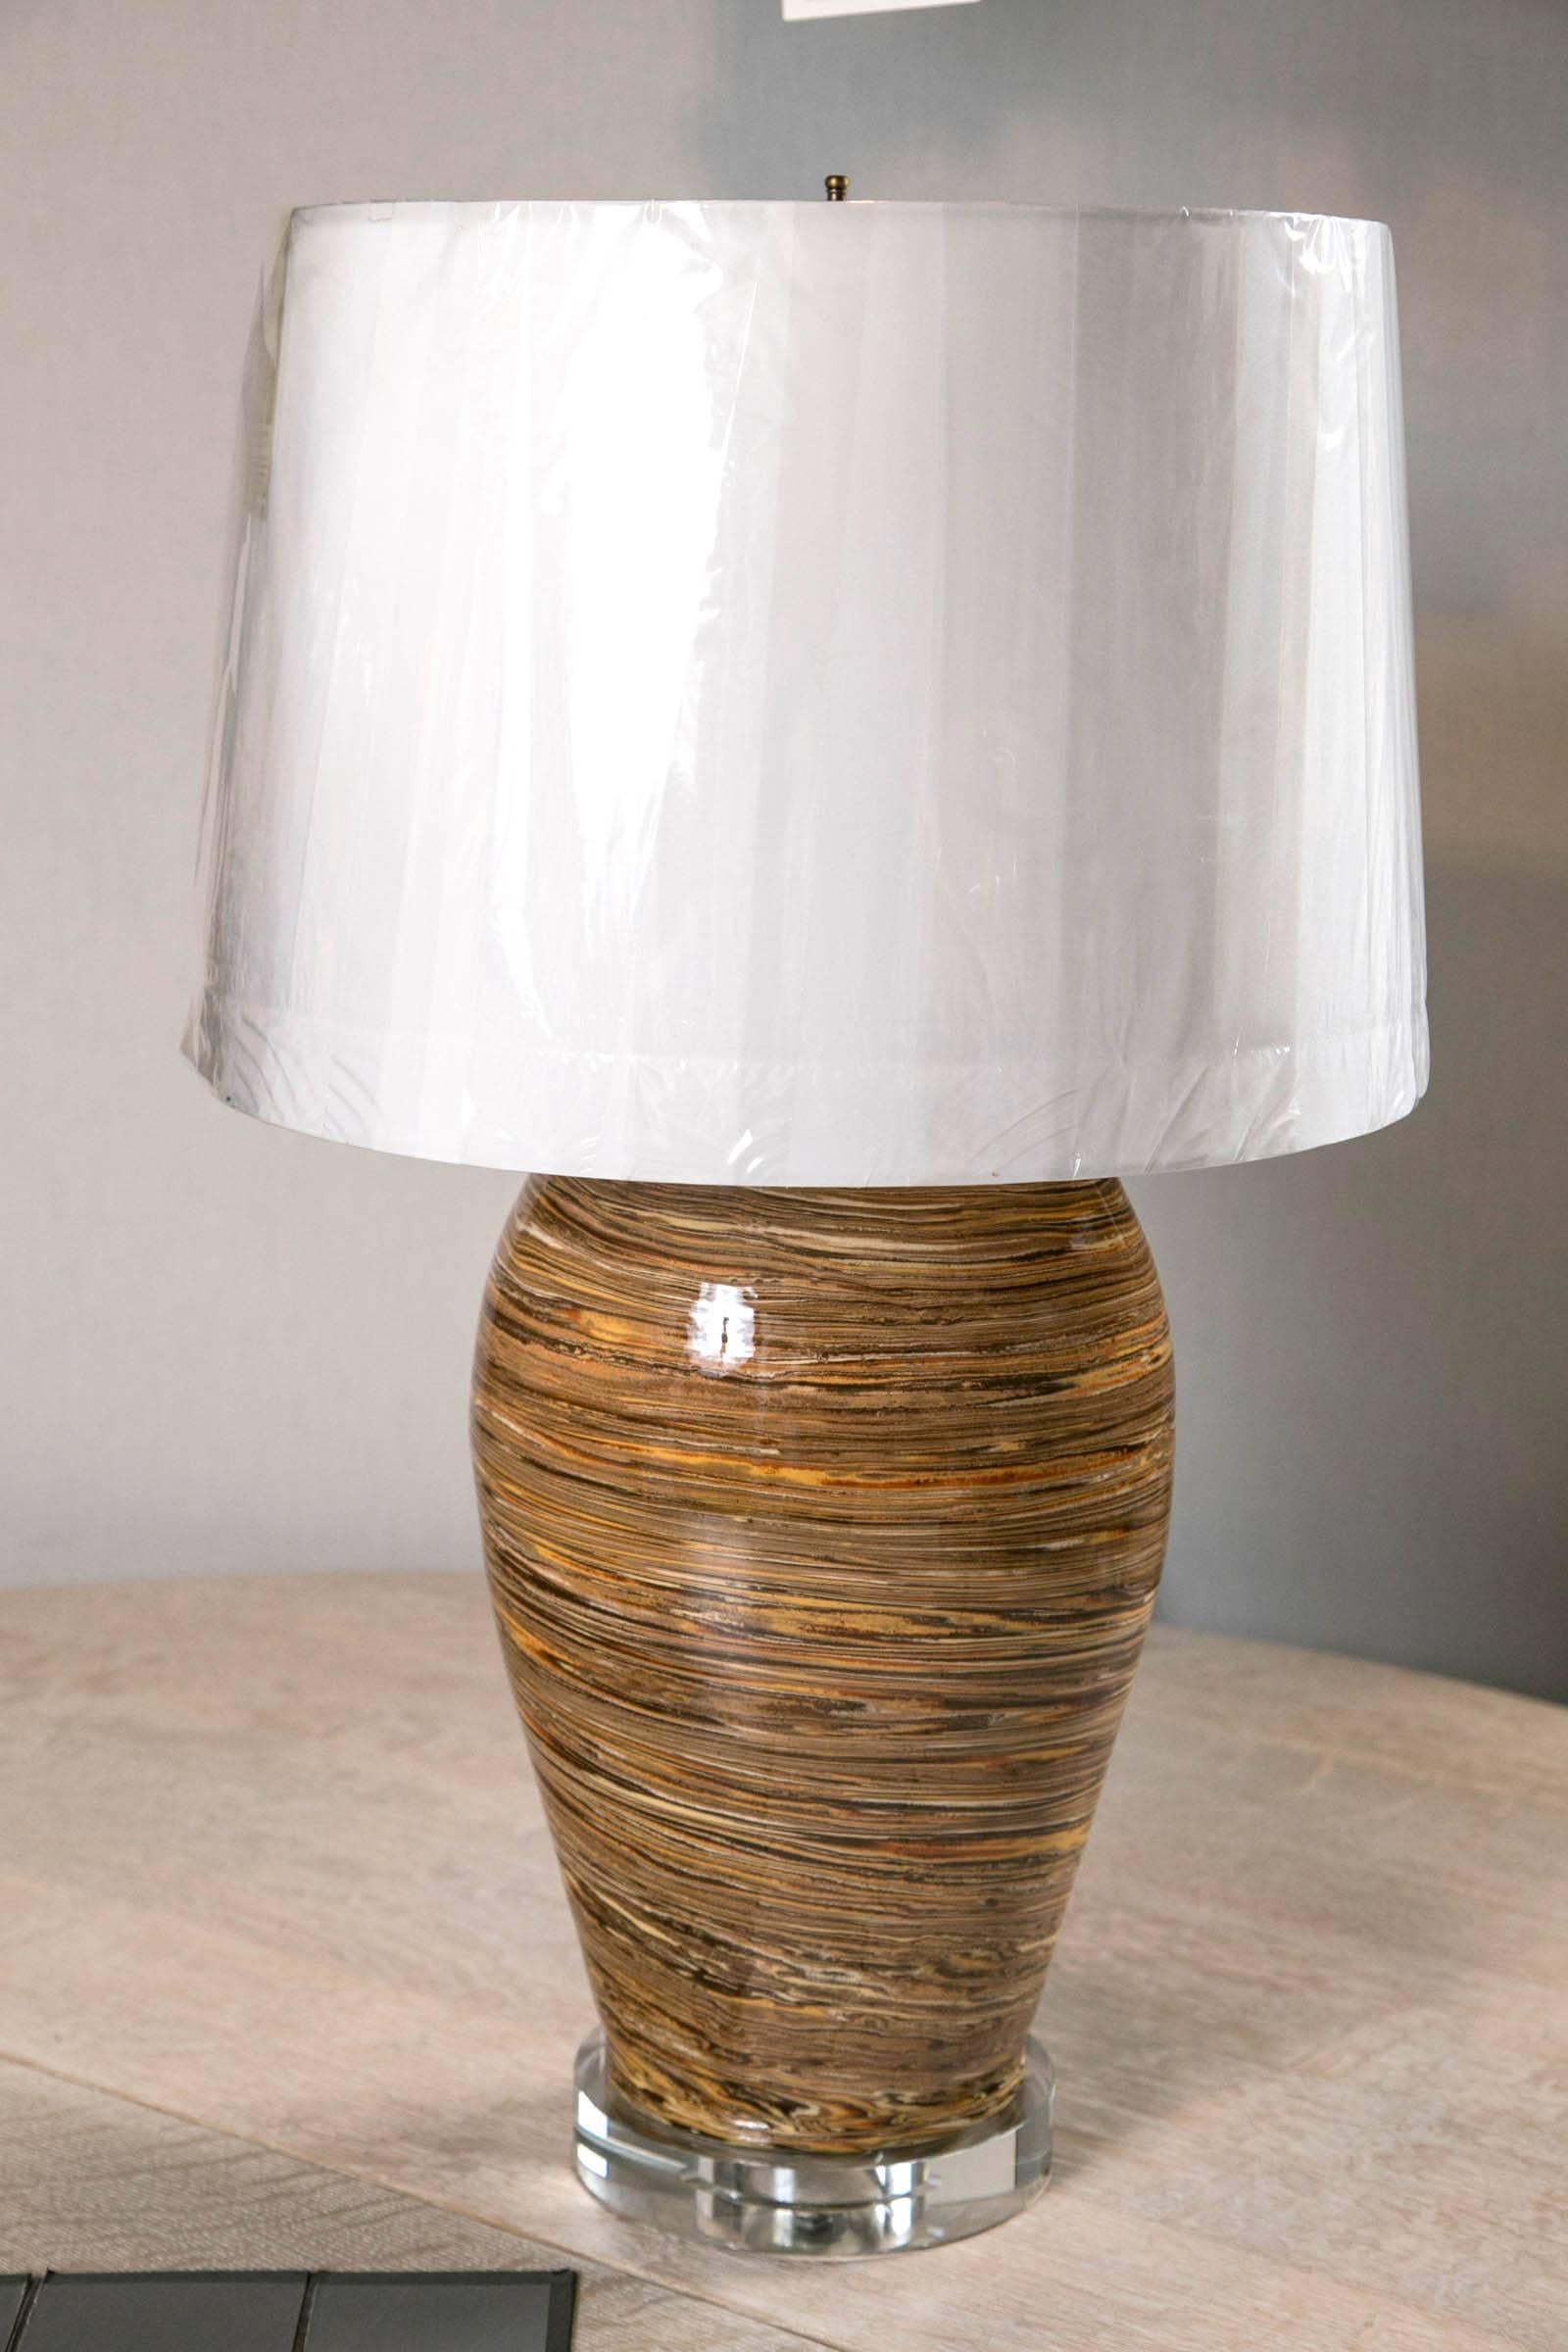 Made in Apt France this pair of hand thrown pottery lamps are just the right touch of handmade. Lucite bases make them very stylish indeed.These lamps are priced at $2950 each.